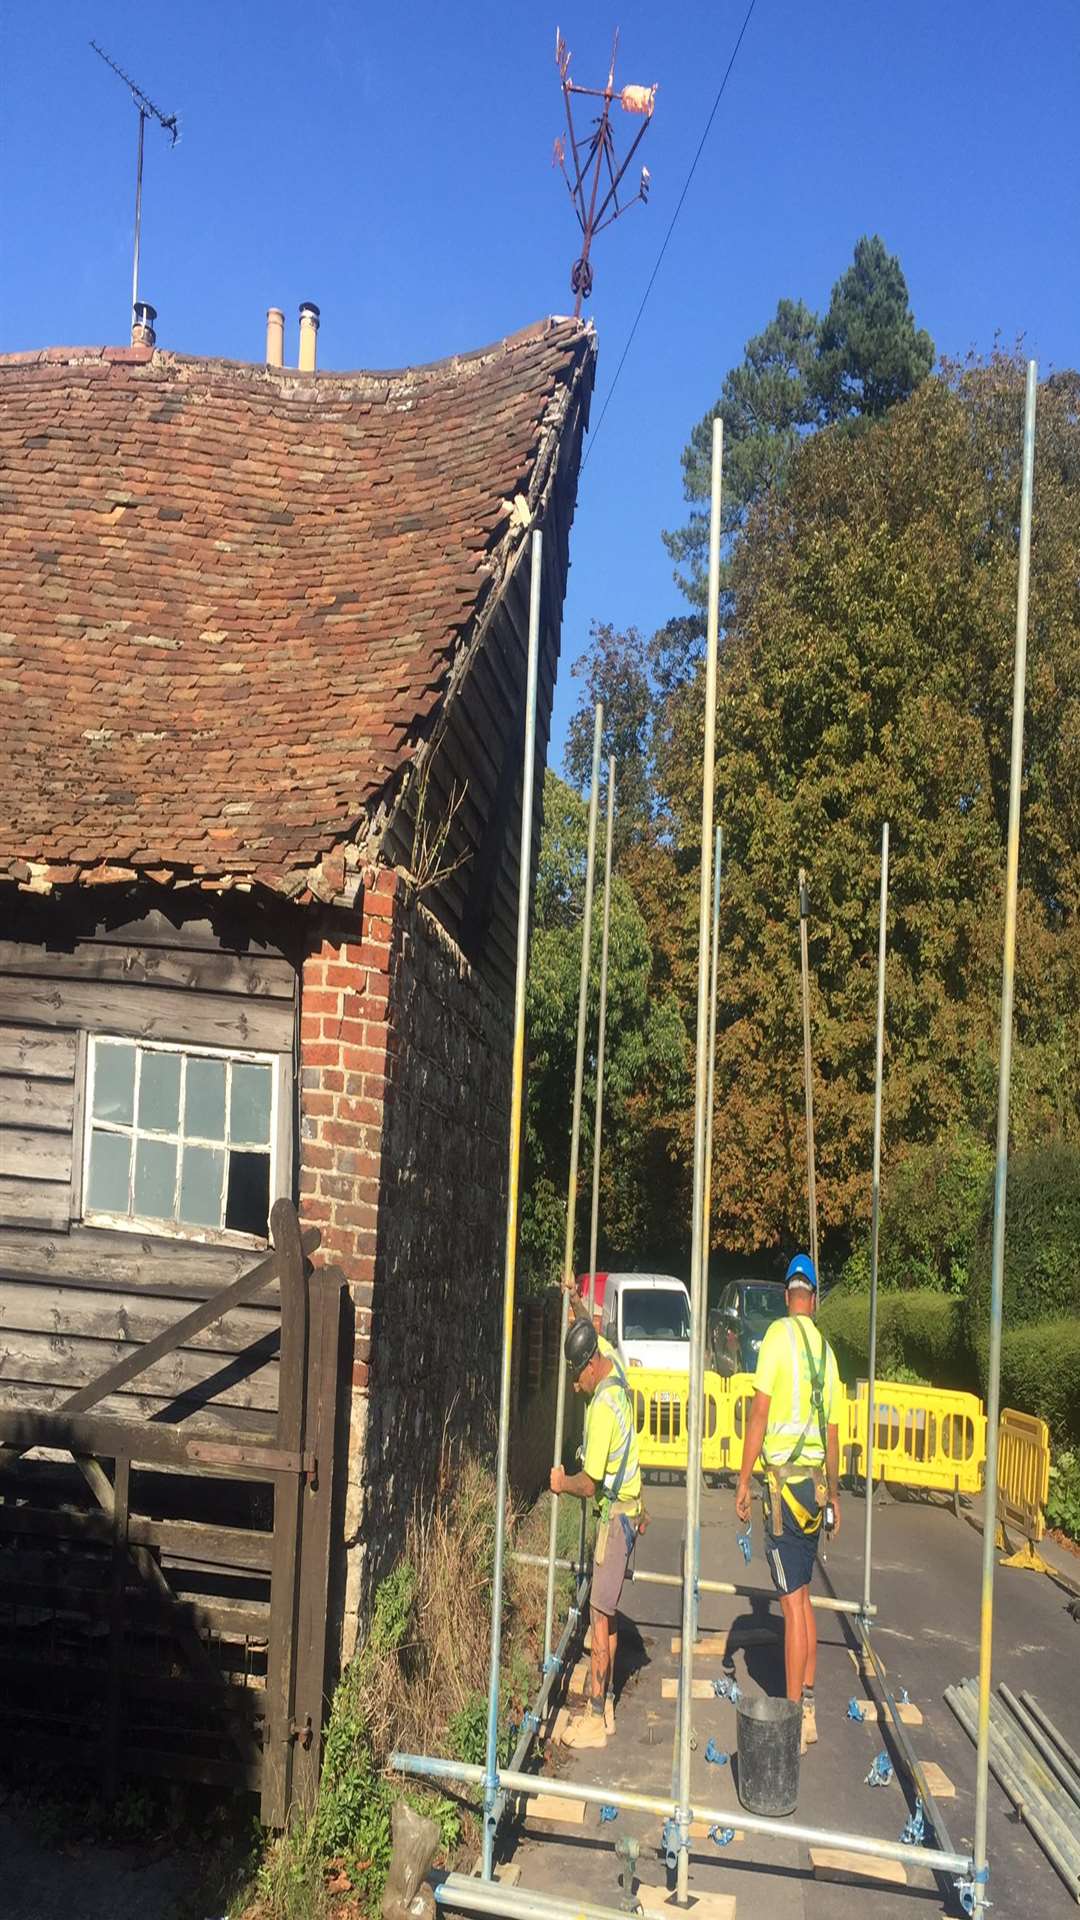 The building is unsafe and being repaired by Brownes' Scaffolding. Pic from @DavidBr61681566 on Twitter